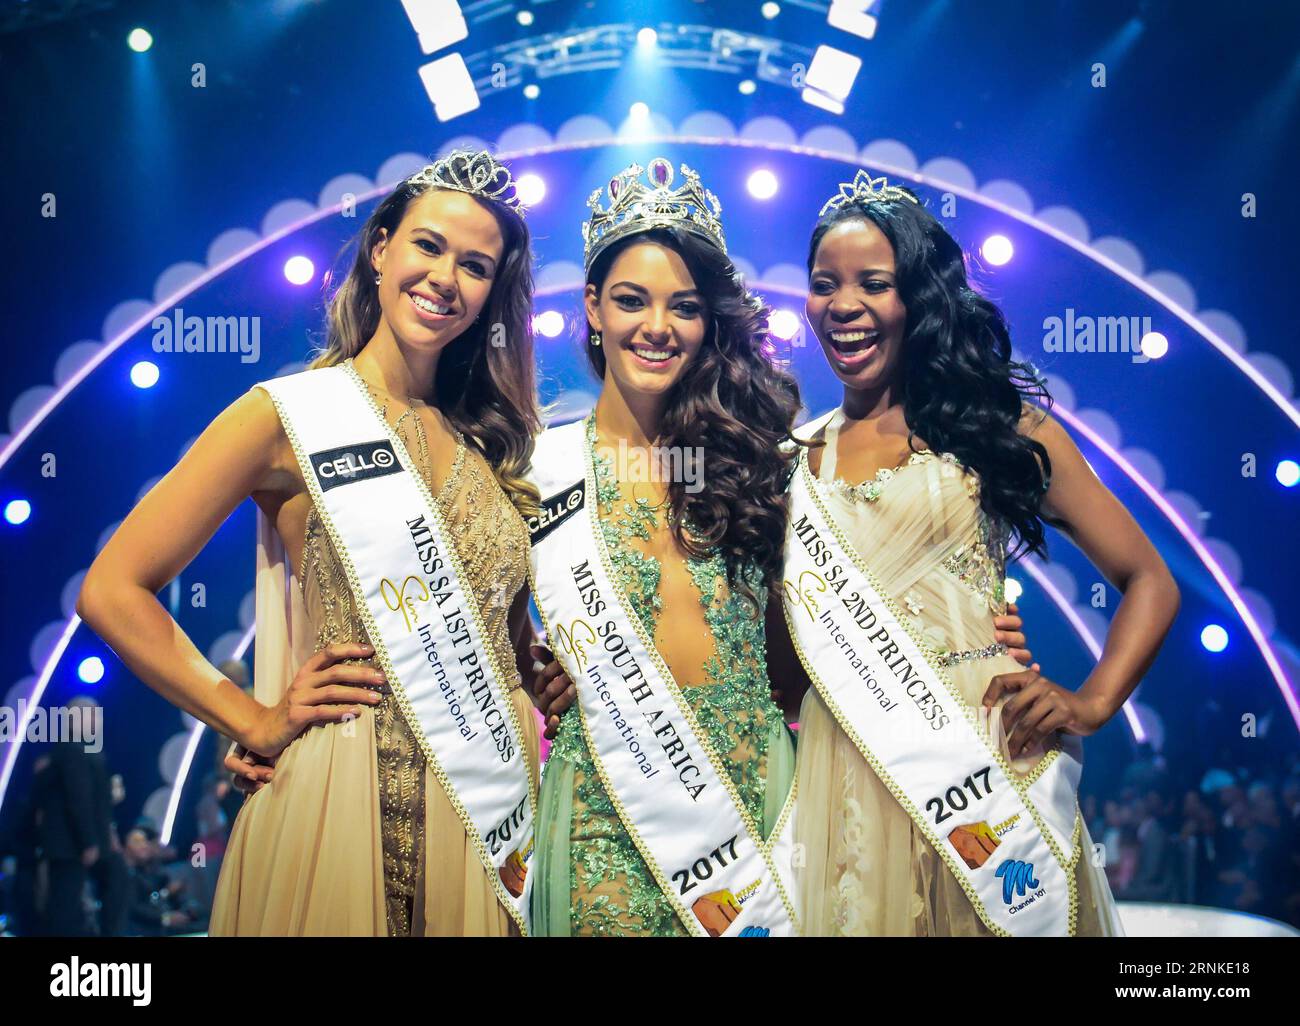 Bilder des Tages (170326) -- SUN CITY (SOUTH AFRICA), March 26, 2017 -- The first prize winner Demi-Leigh Nel-Peters (C), the first runner-up Ade van Heerden (L) and the second runner-up Boipelo Mabe pose for photos during the?Miss?South?Africa?2017 Pageant and Celebration in Sun City, North West Province,?South?Africa, on March 26, 2017. The?Miss?South?Africa?2017 Pageant and Celebration was held here Sunday. Demi-Leigh Nel-Peters from Sedgefield in the Western Cape Province, a 21-year-old part-time model, was crowned?Miss?South?Africa?2017 with a prize of one million rand (about 80,000 US do Stock Photo